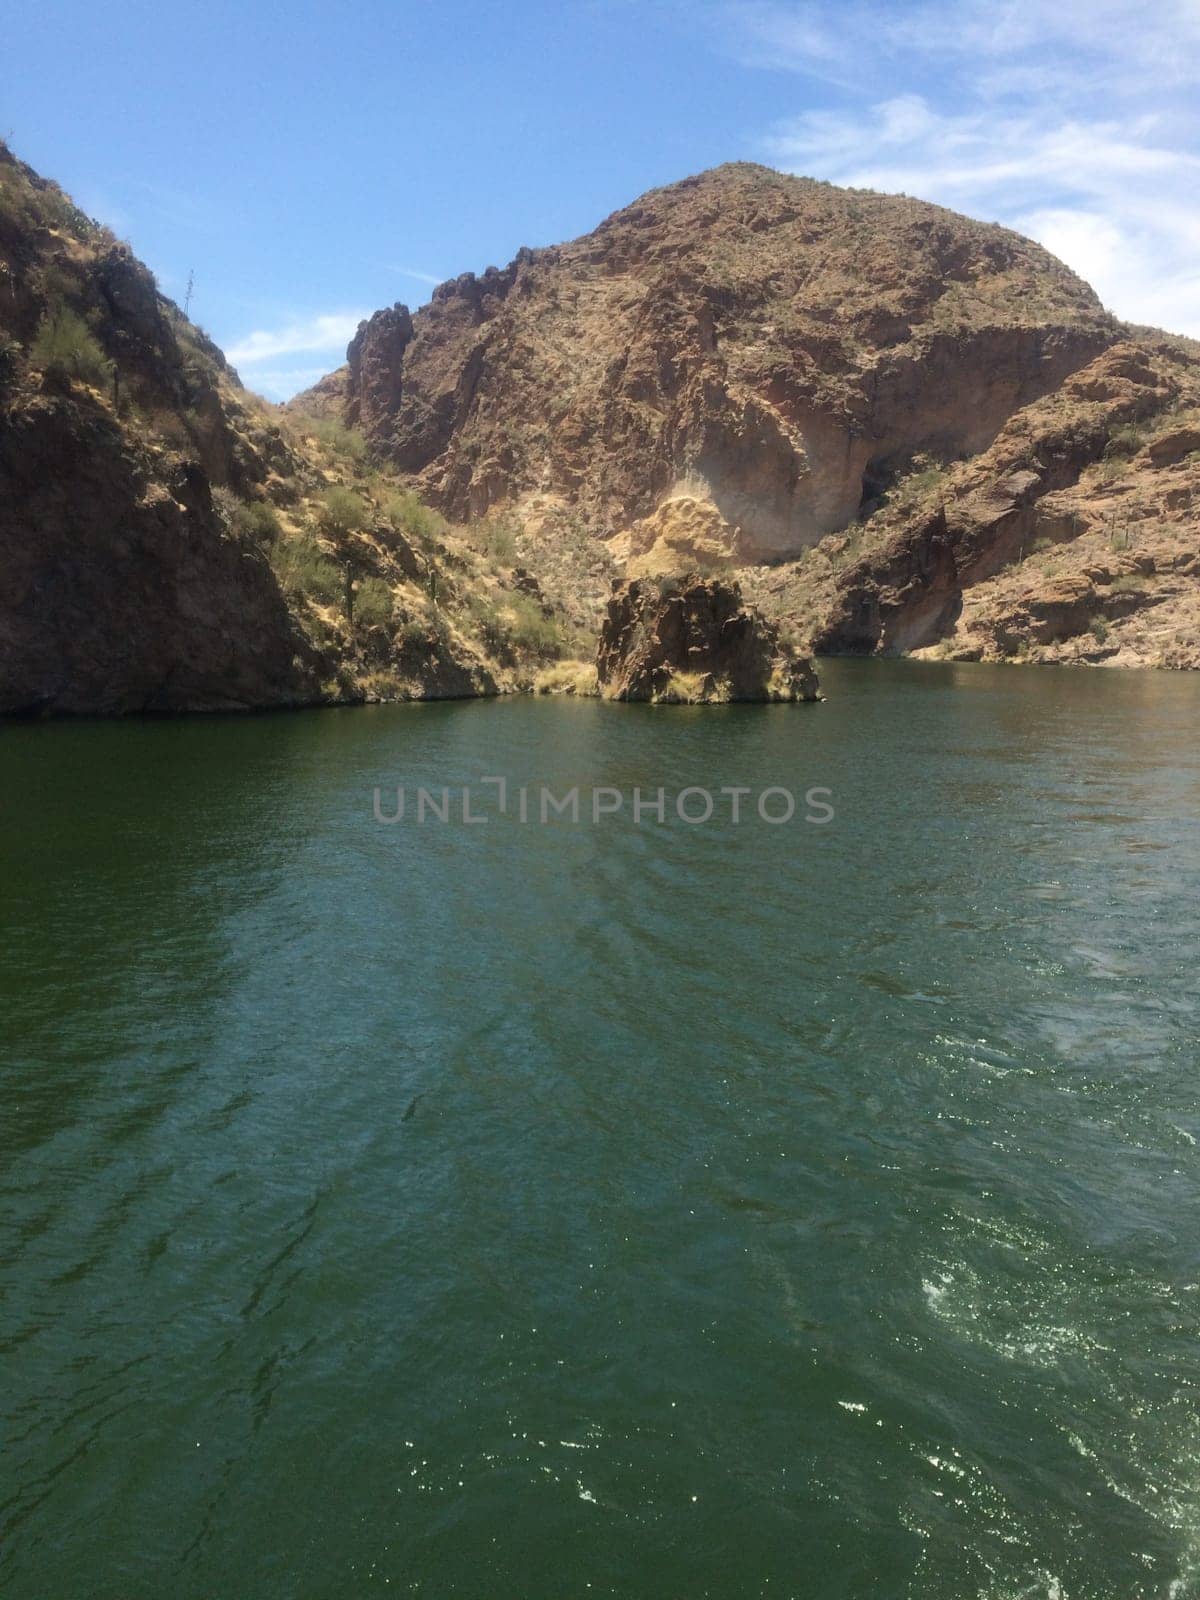 Rugged Rocky Shoreline of Canyon Lake, Arizona. View from Boat. Water recreation in the Arizona desert. High quality photo